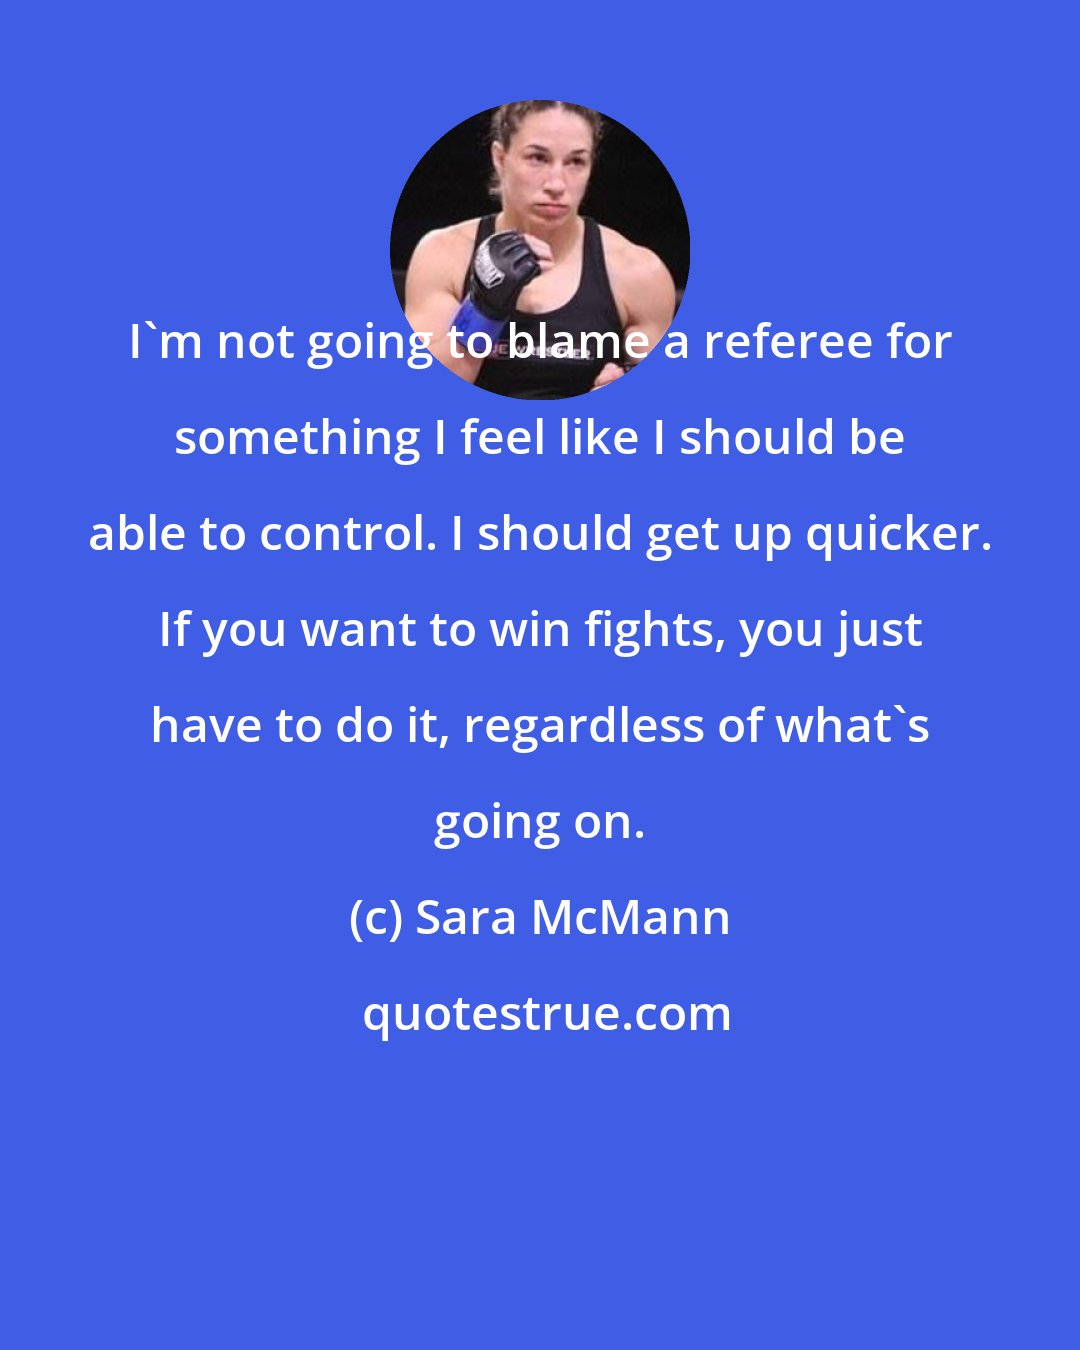 Sara McMann: I'm not going to blame a referee for something I feel like I should be able to control. I should get up quicker. If you want to win fights, you just have to do it, regardless of what's going on.